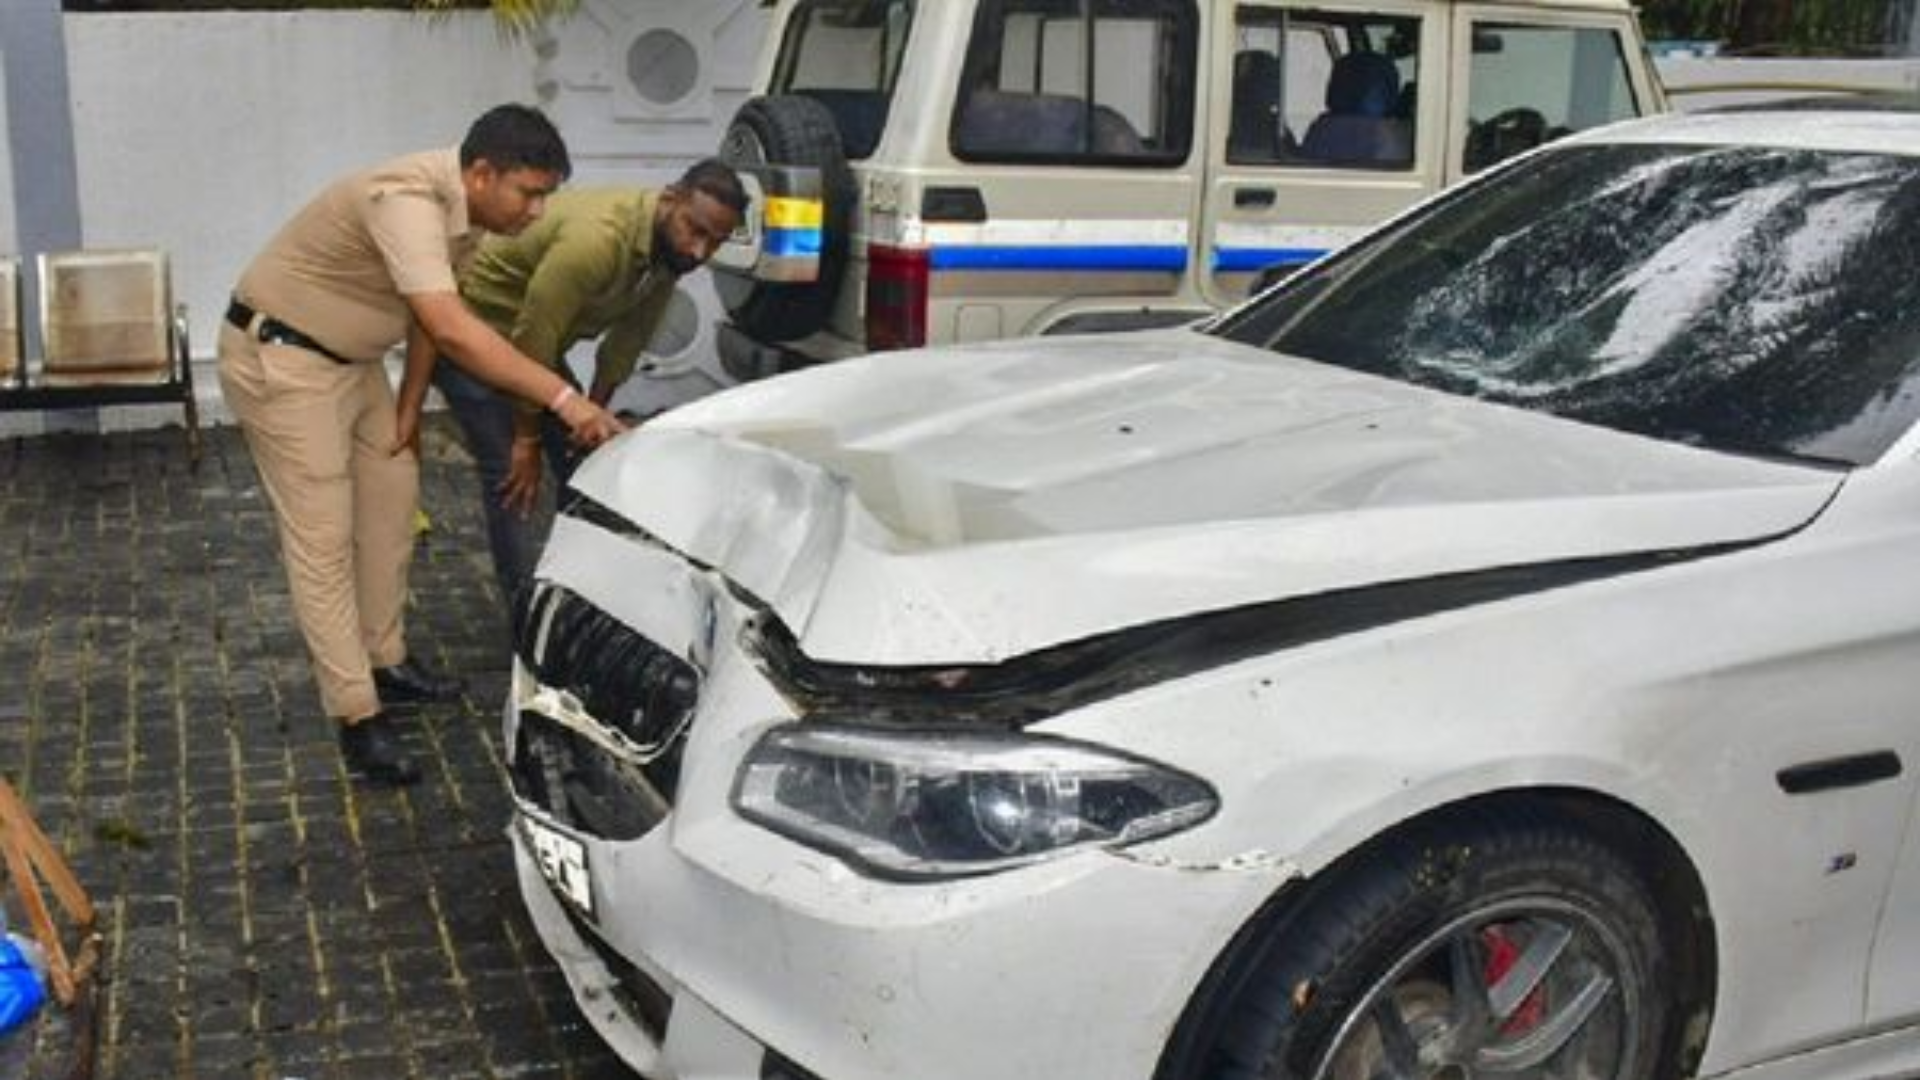 Mumbai BMW crash: Second accused Arrested While Mihir Shah Still At Large